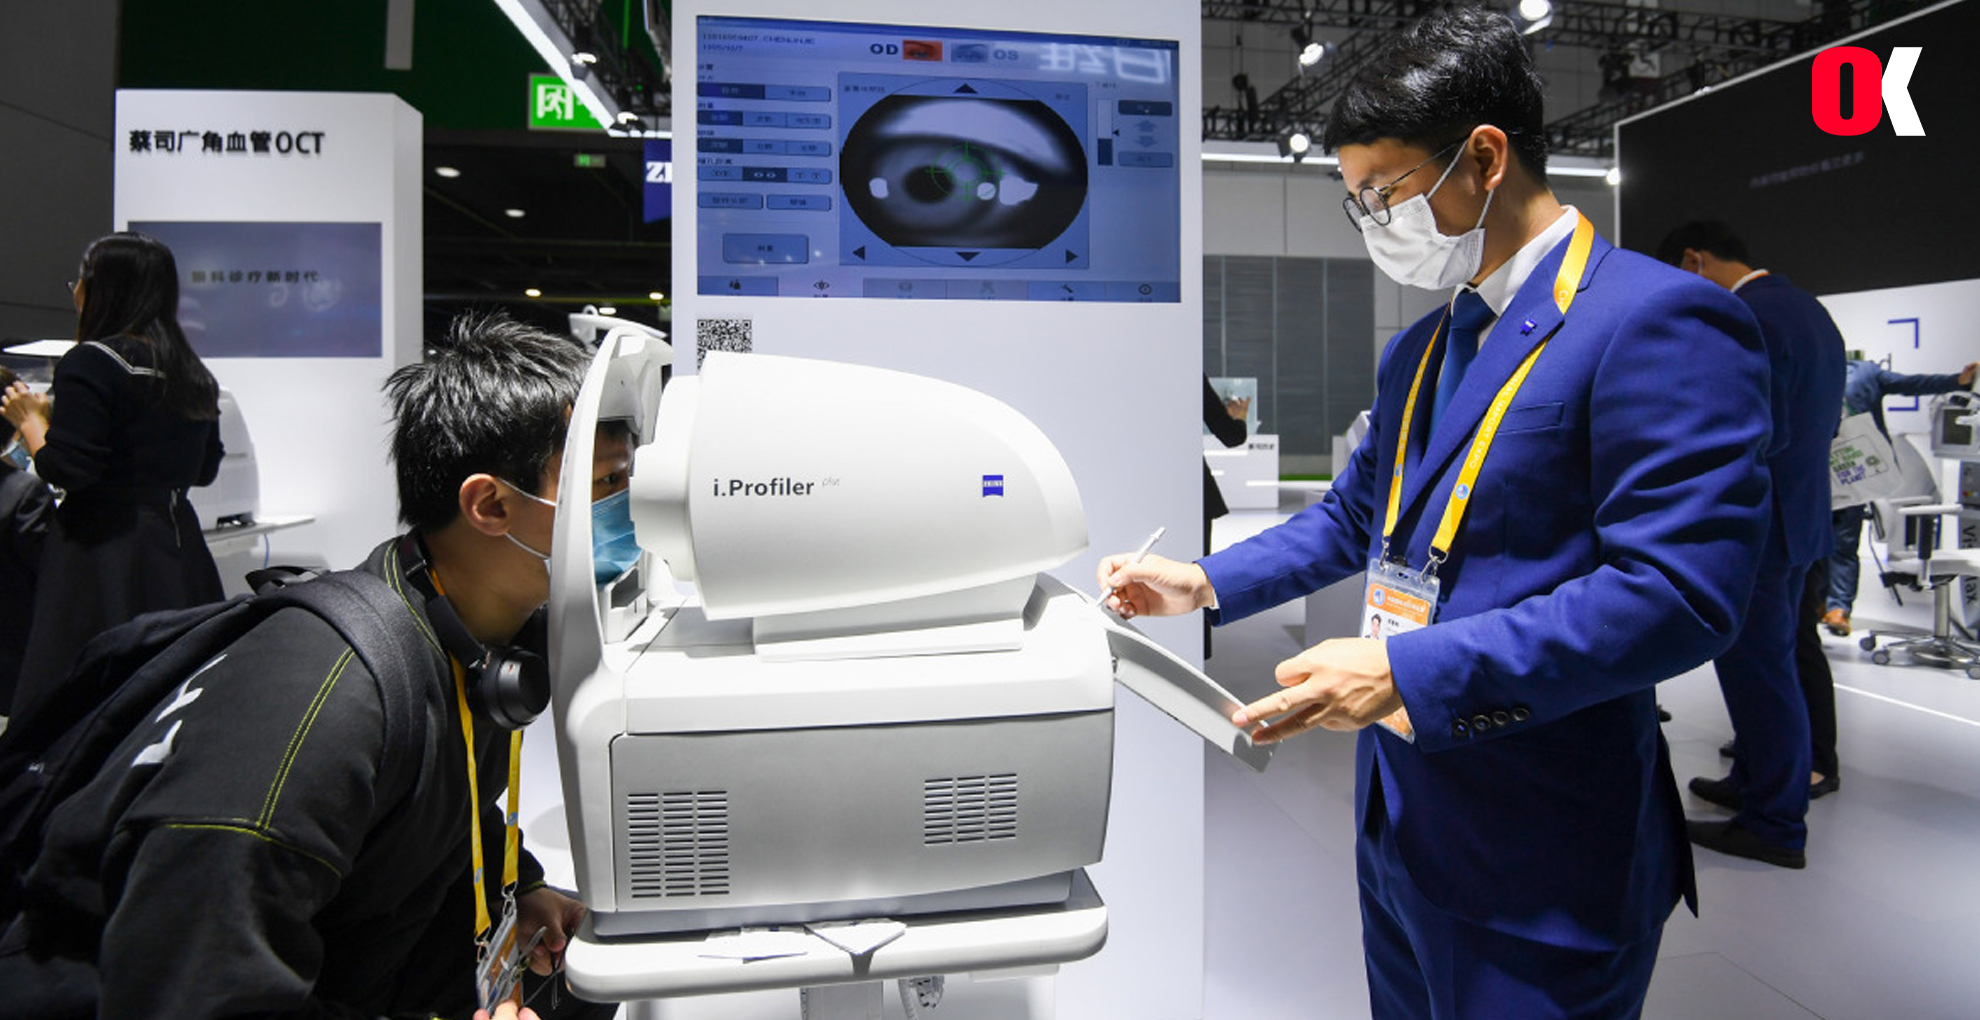 Zeiss taps into an aging society with eye care products